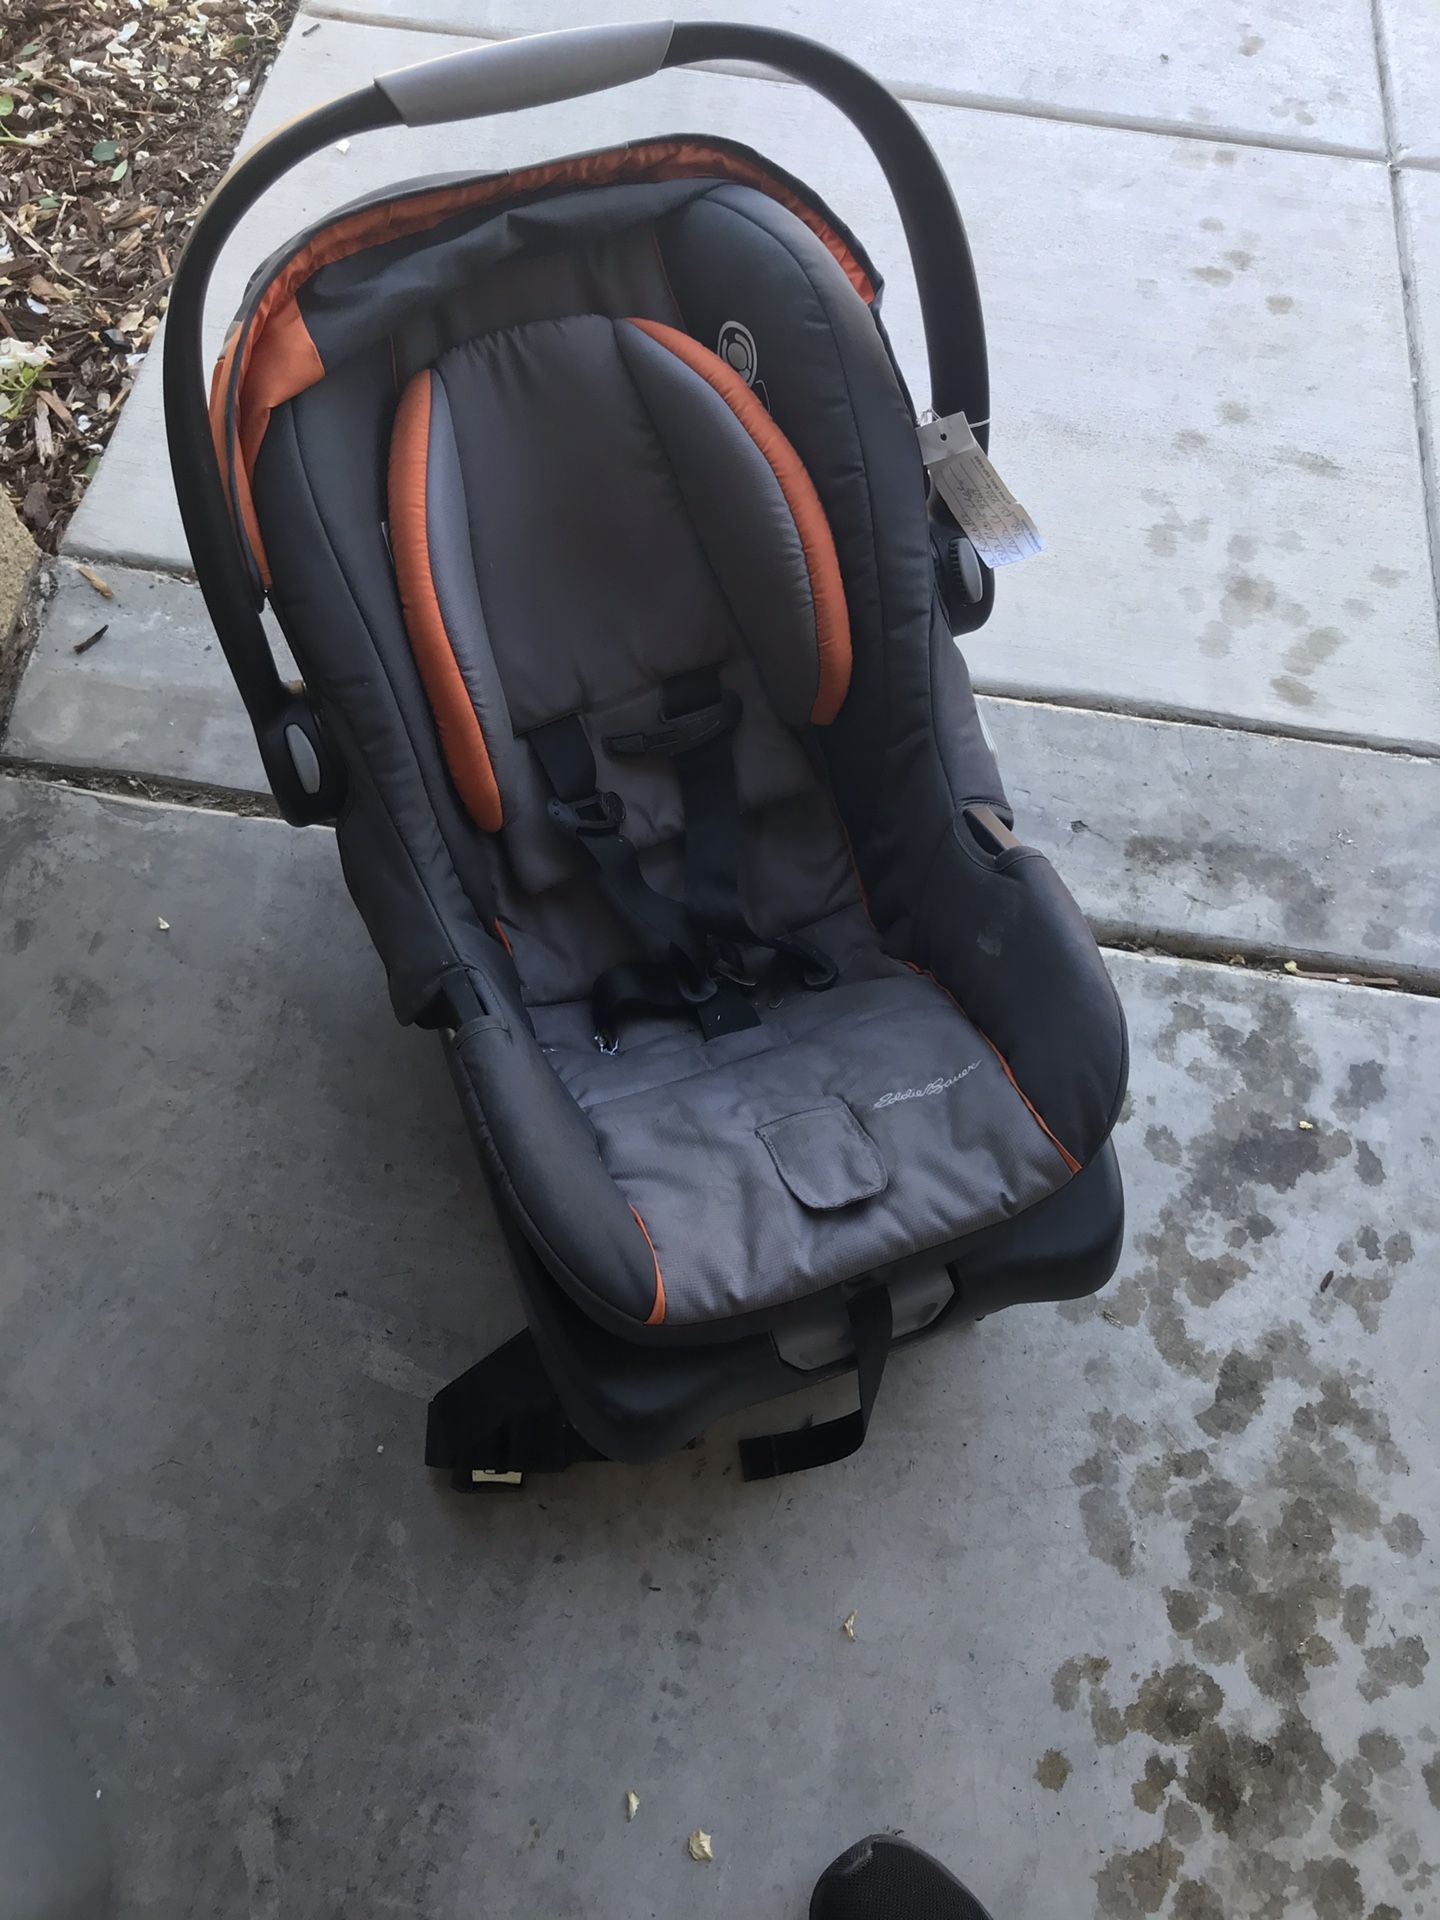 Eddie Bauer rear facing car seat with with base